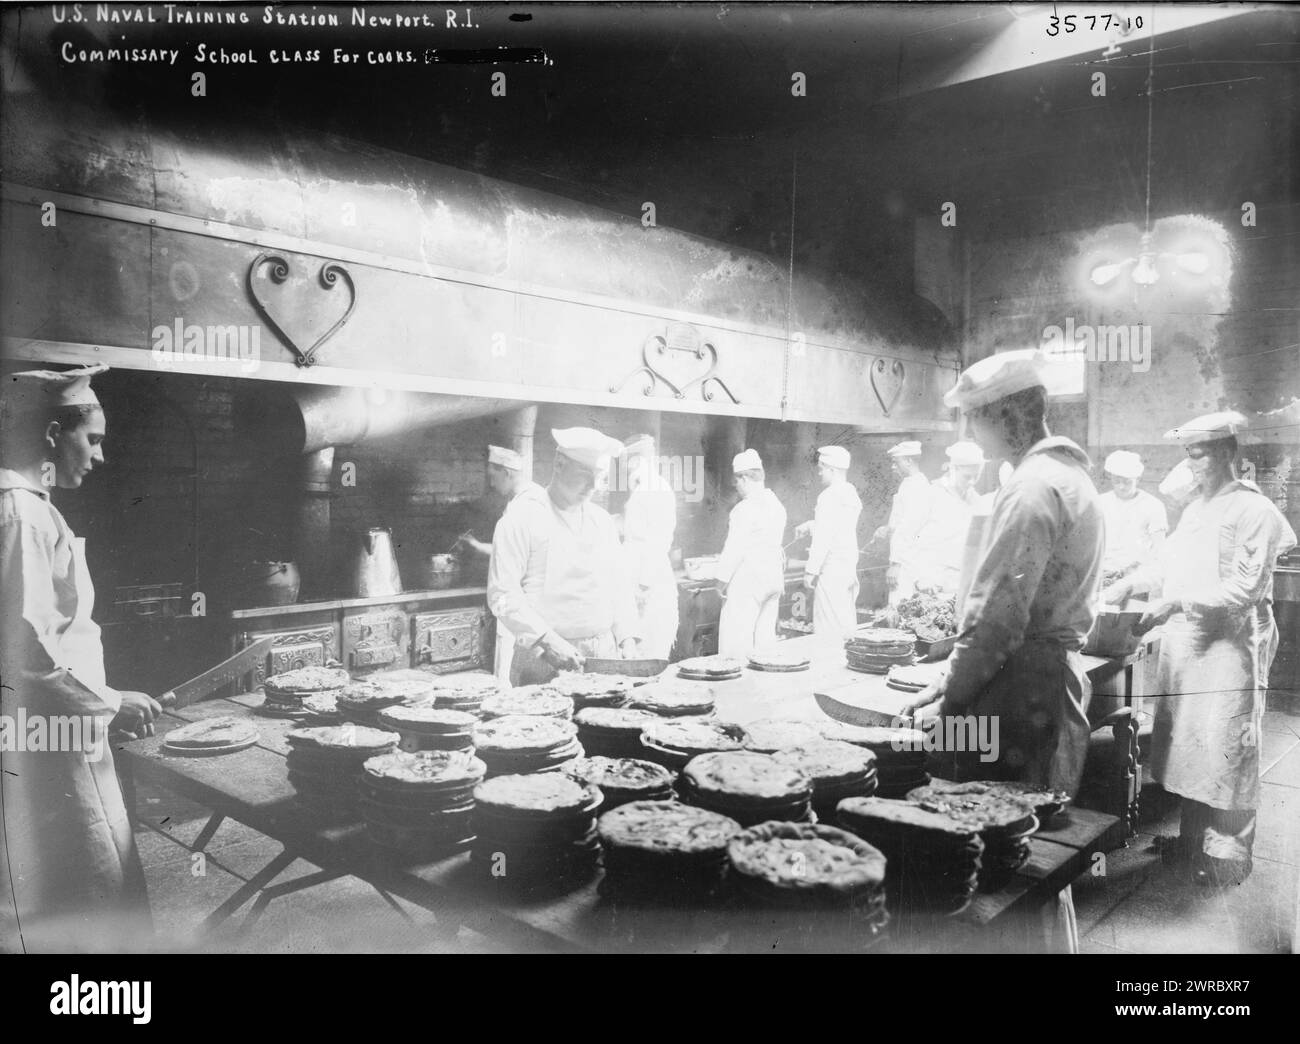 U.S. Naval training station, Newport, R.I., Commissary School class for cooks, between ca. 1910 and ca. 1915, Newport, R.I, Glass negatives, 1 negative: glass Stock Photo